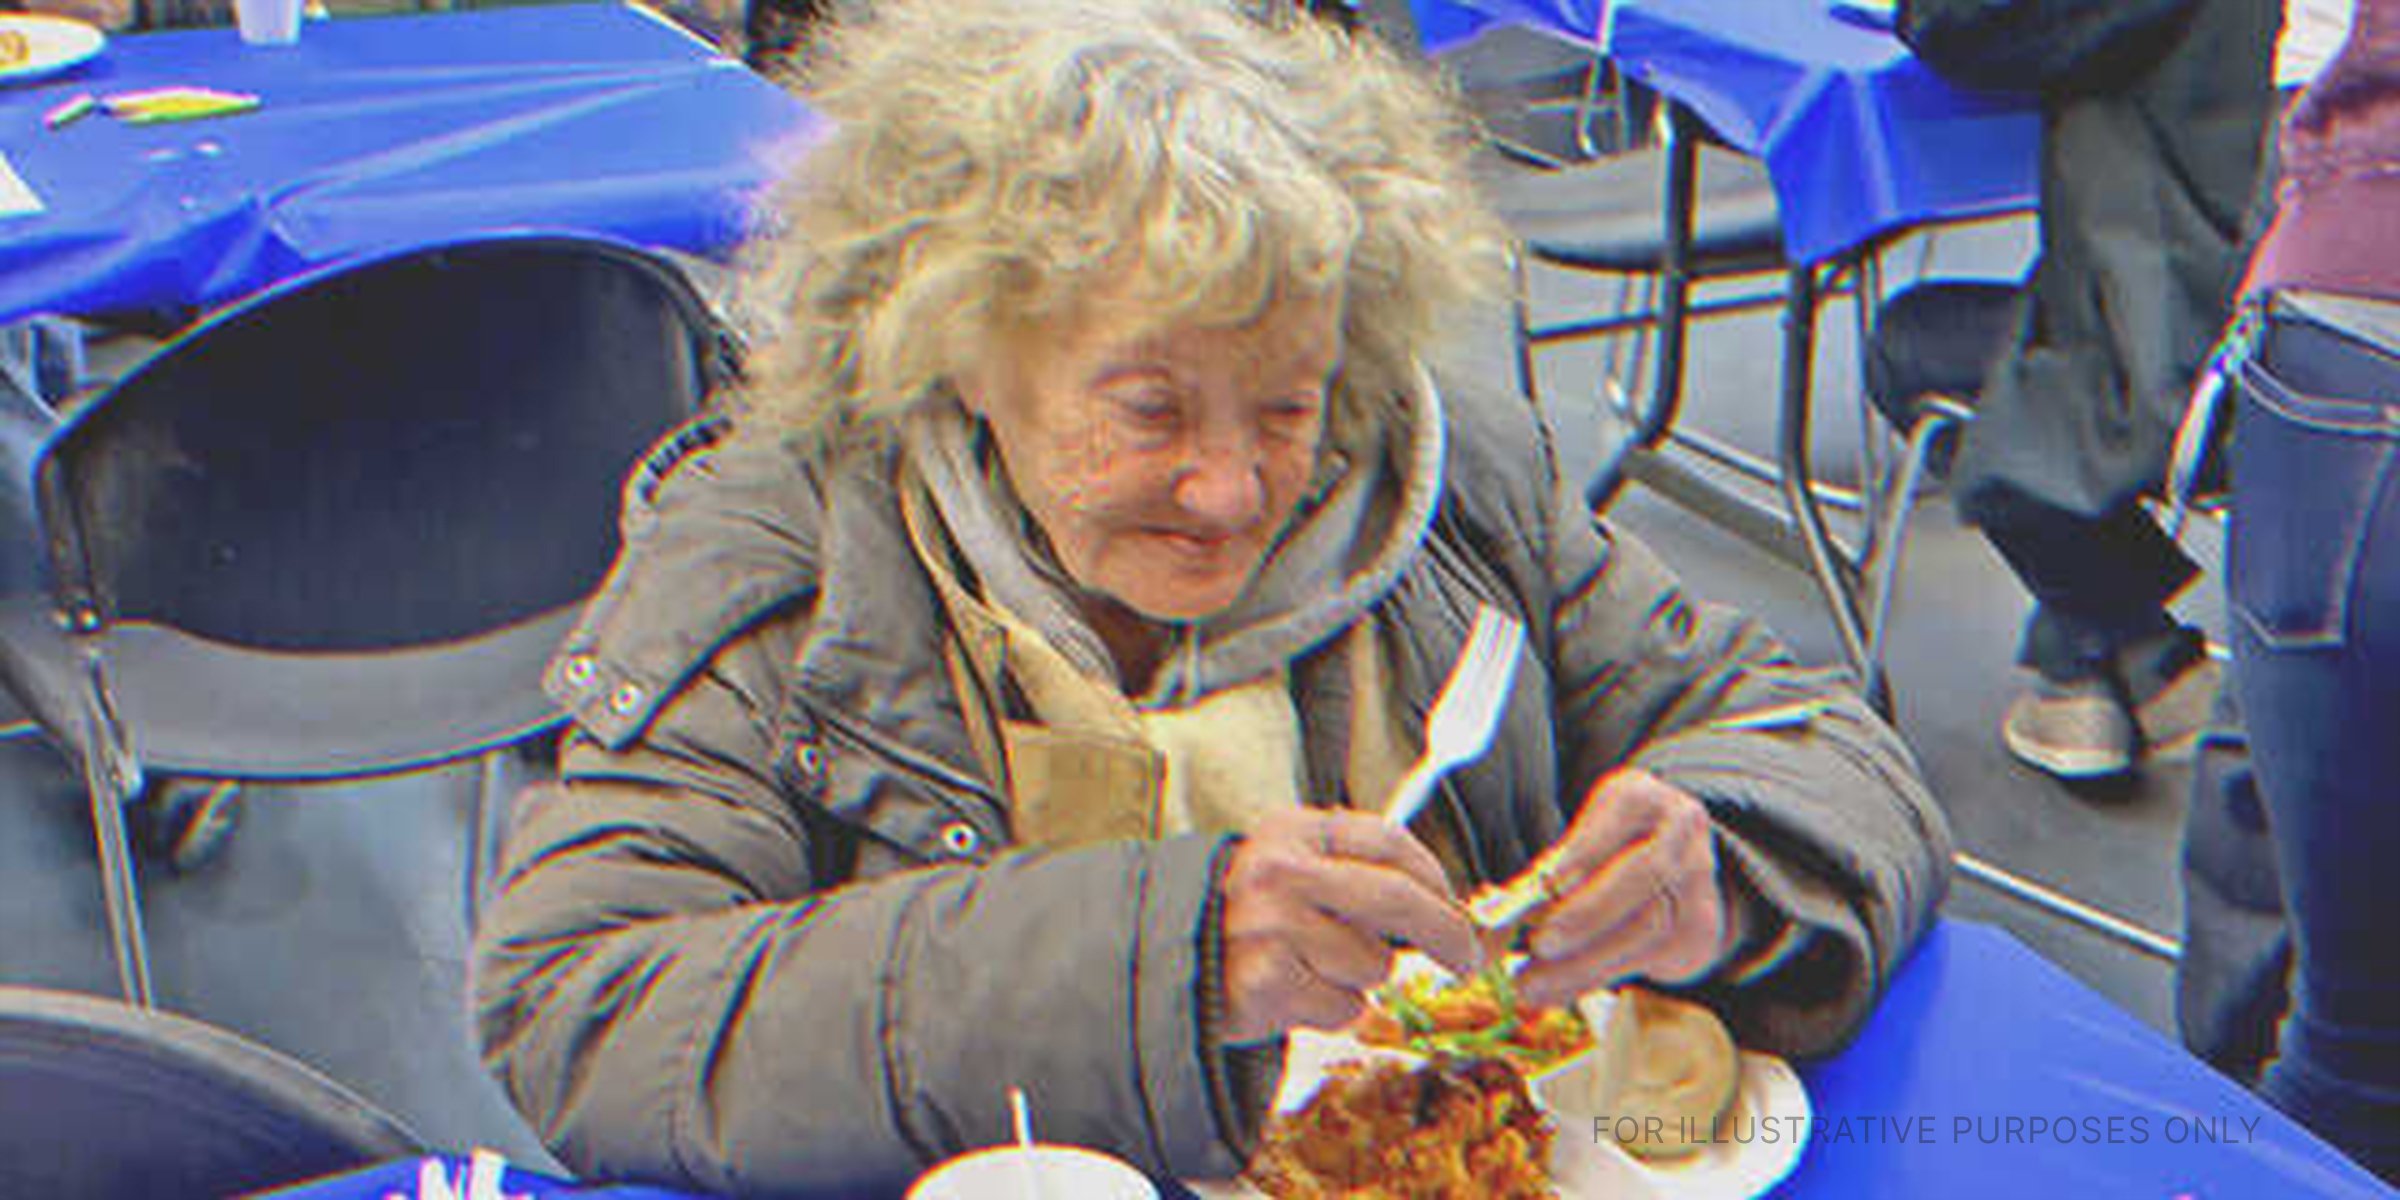 Old Woman Eating Her Food. | Source: Getty Images